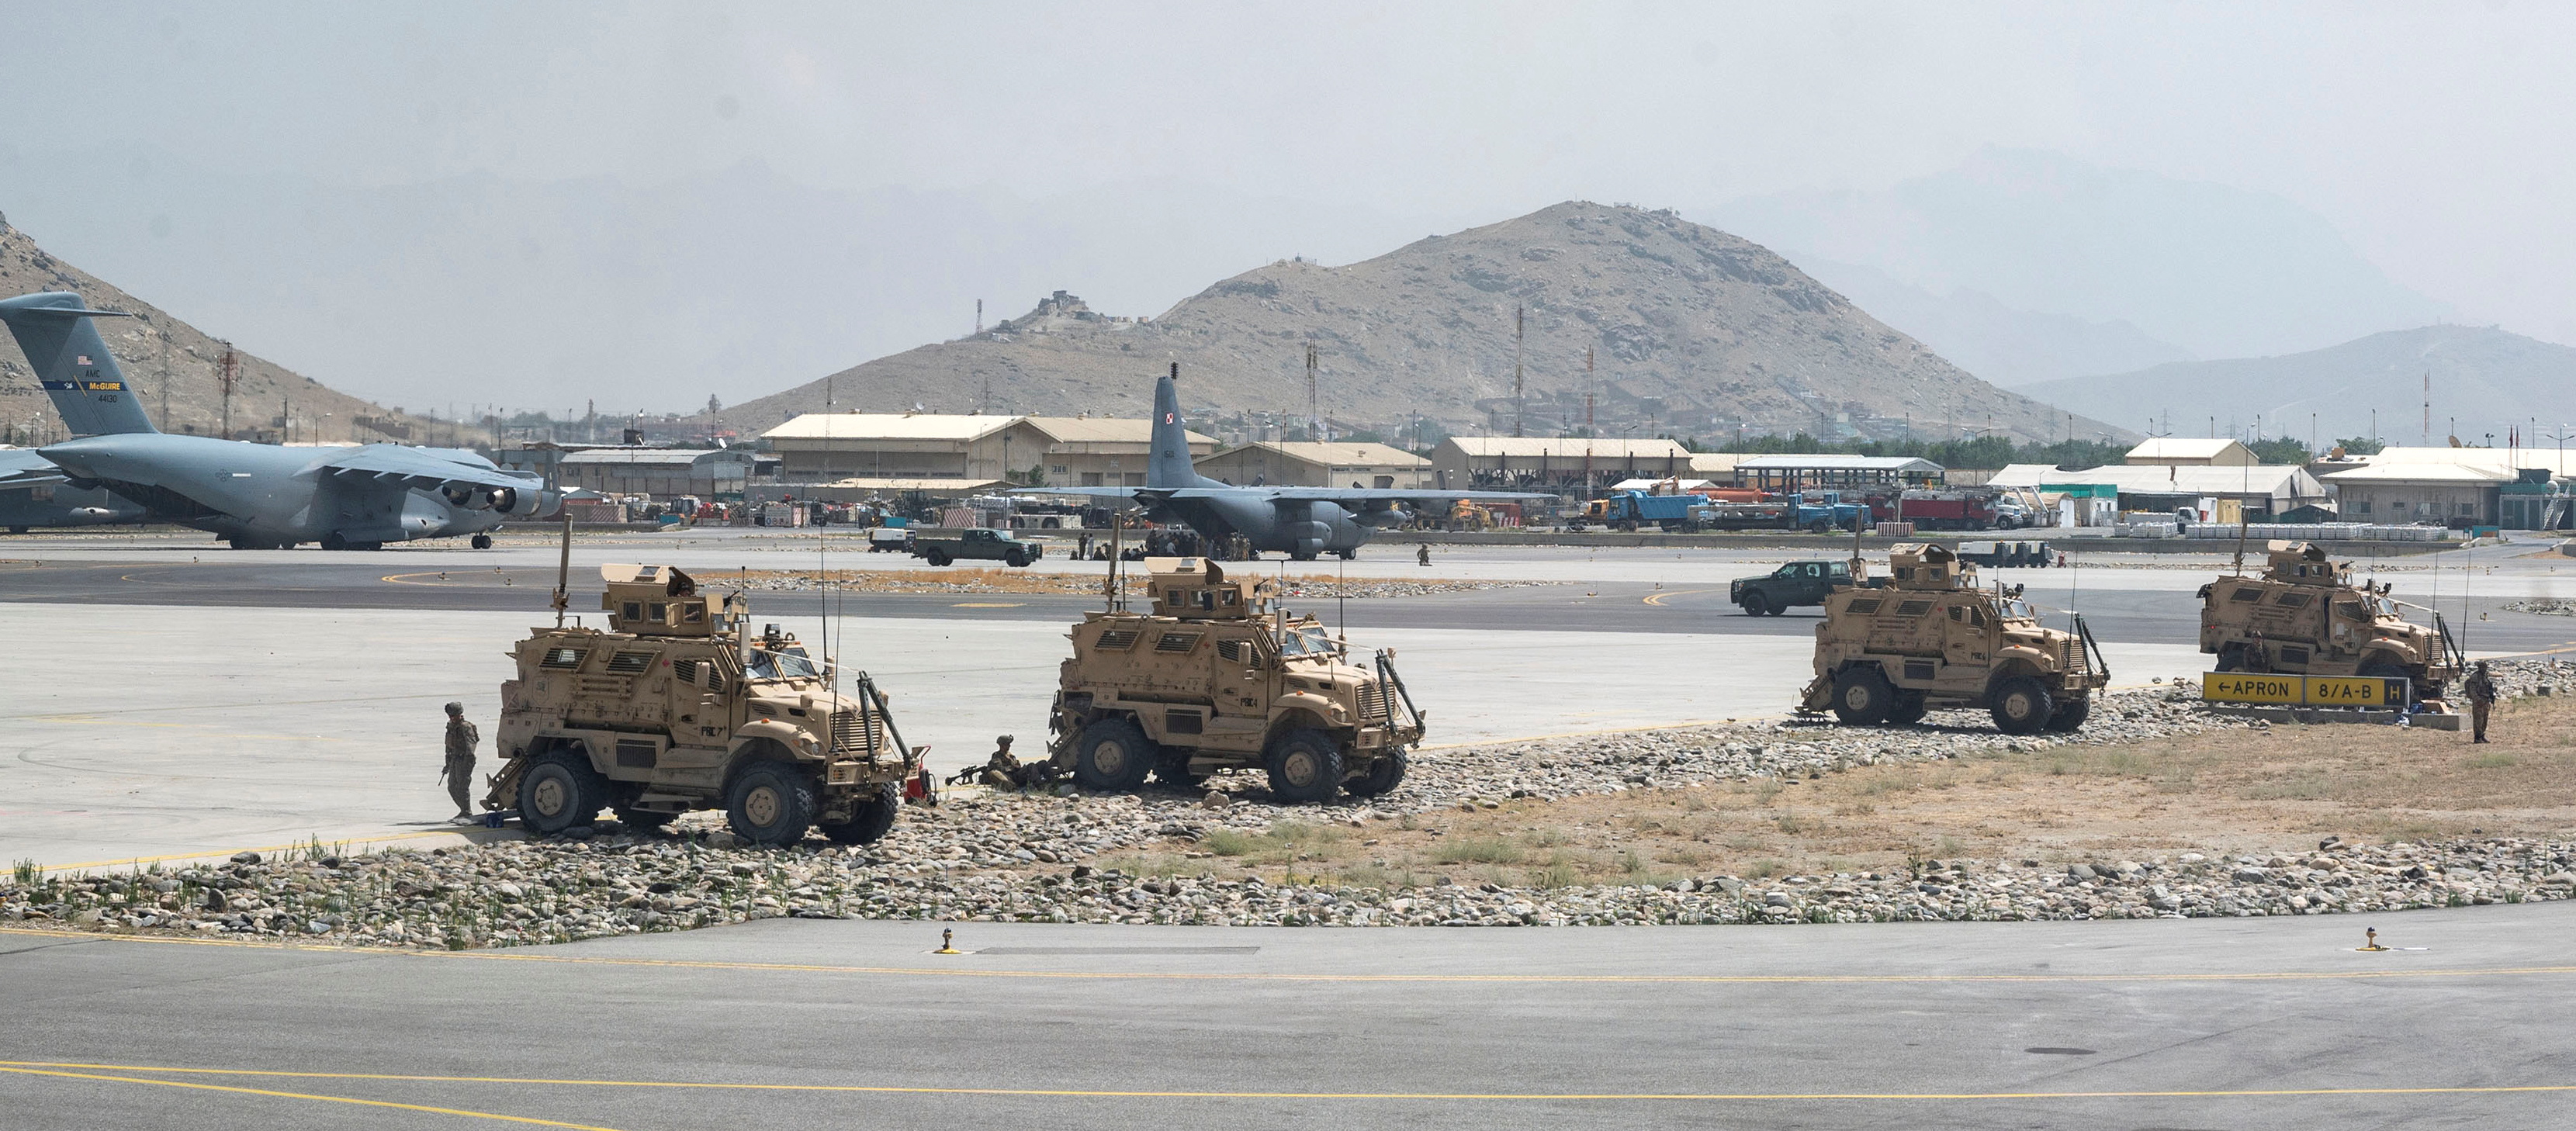 U.S. Army soldiers assigned to the 82nd Airborne Division patrol Hamid Karzai International Airport in Kabul